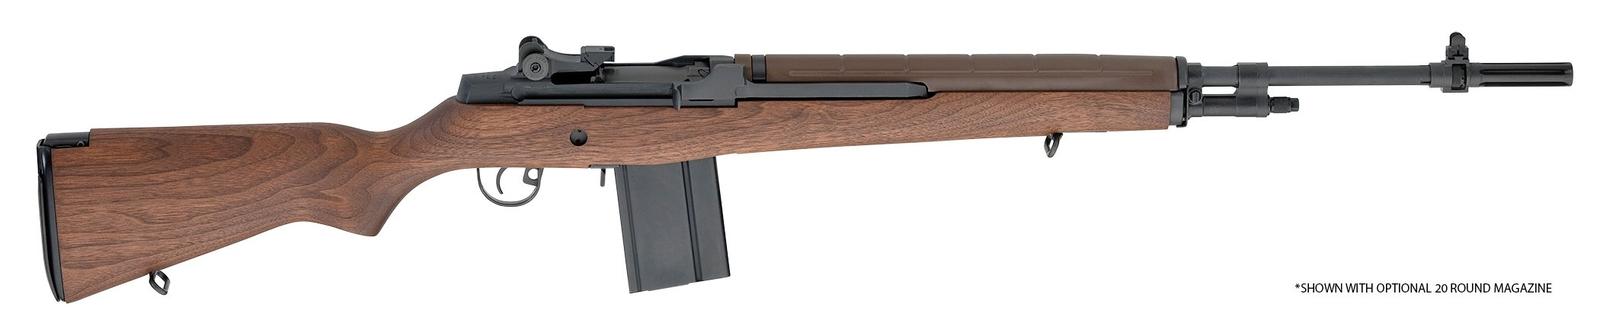  Springfield Armory M1A™ STANDARD ISSUE RIFLE .308 3